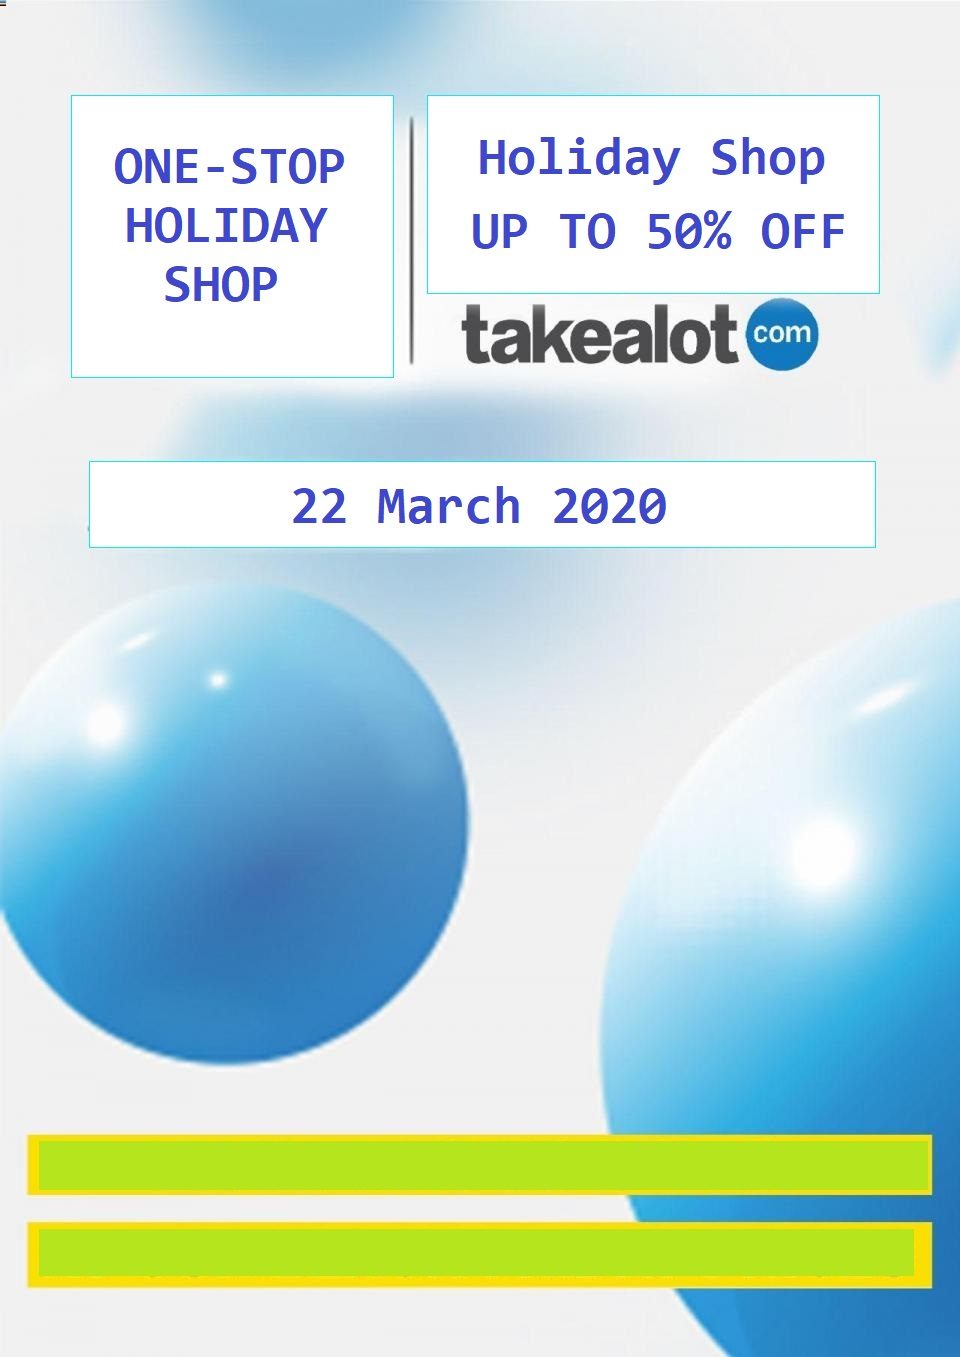 Takealot Specials Holiday Shopping Sale 22 March 2020